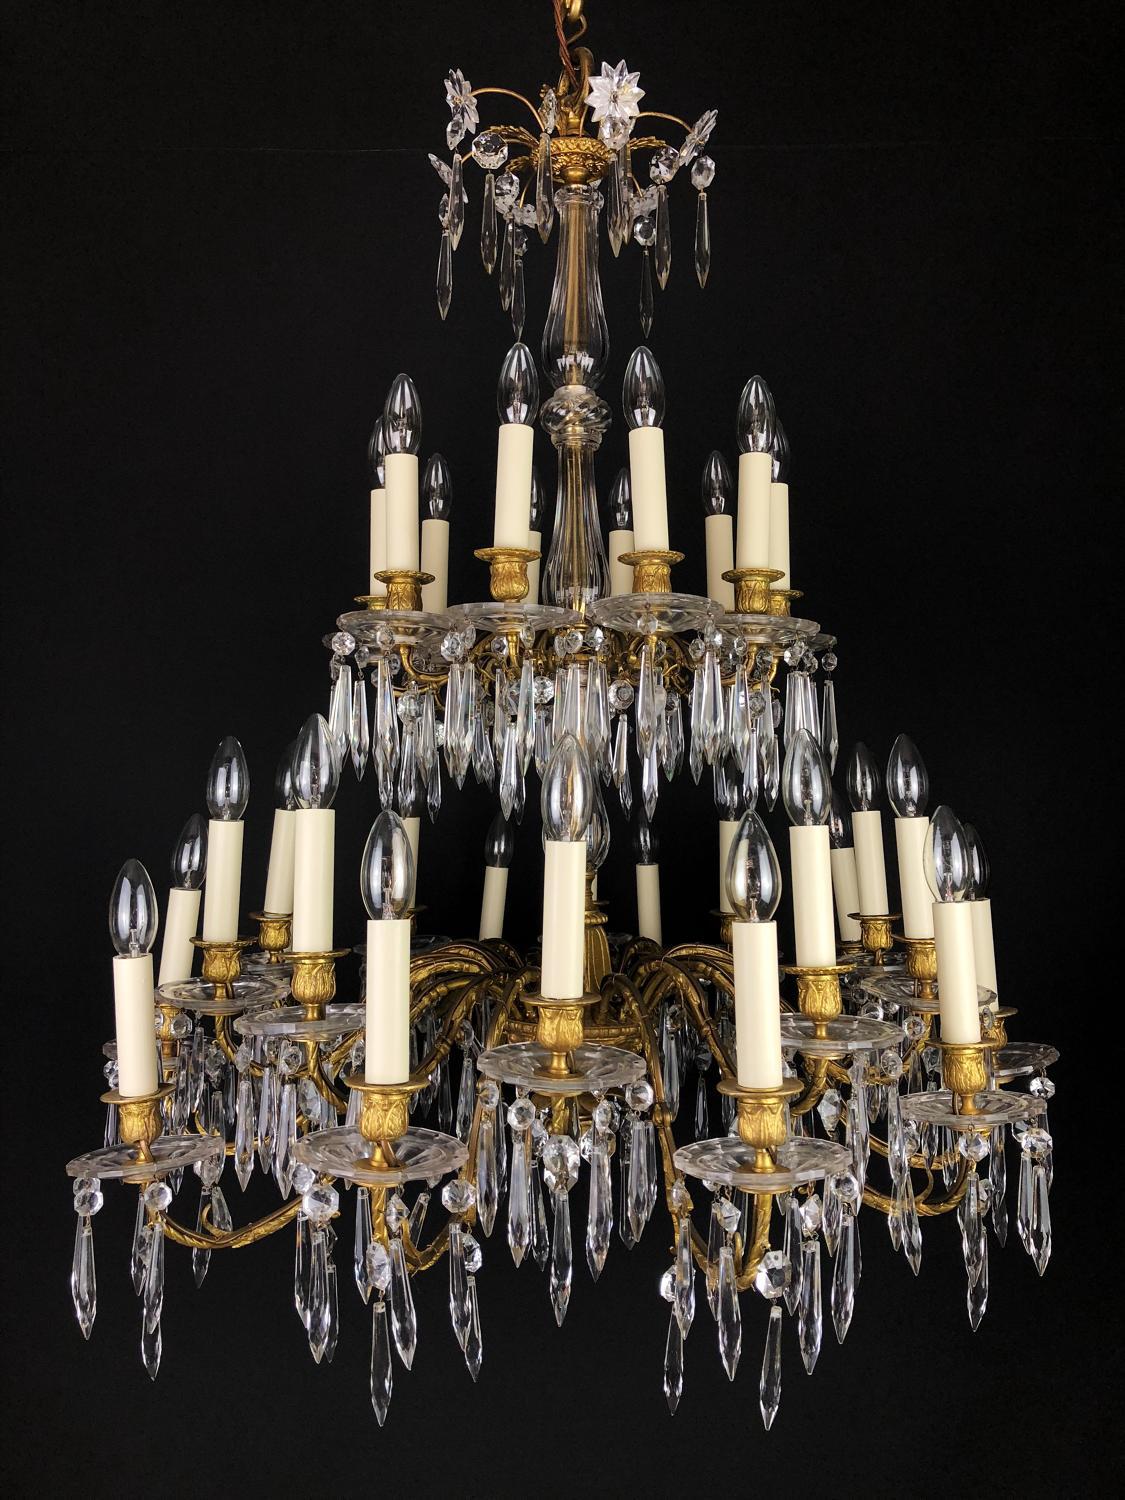 A thirty light Baccarat crystal chandelier with two tiers. The top tier with 10 lights and the bottom tier made up of 20 lights, alternating in height.

circa 1860 to 1870Dimensions:
W: 90cm (35.4